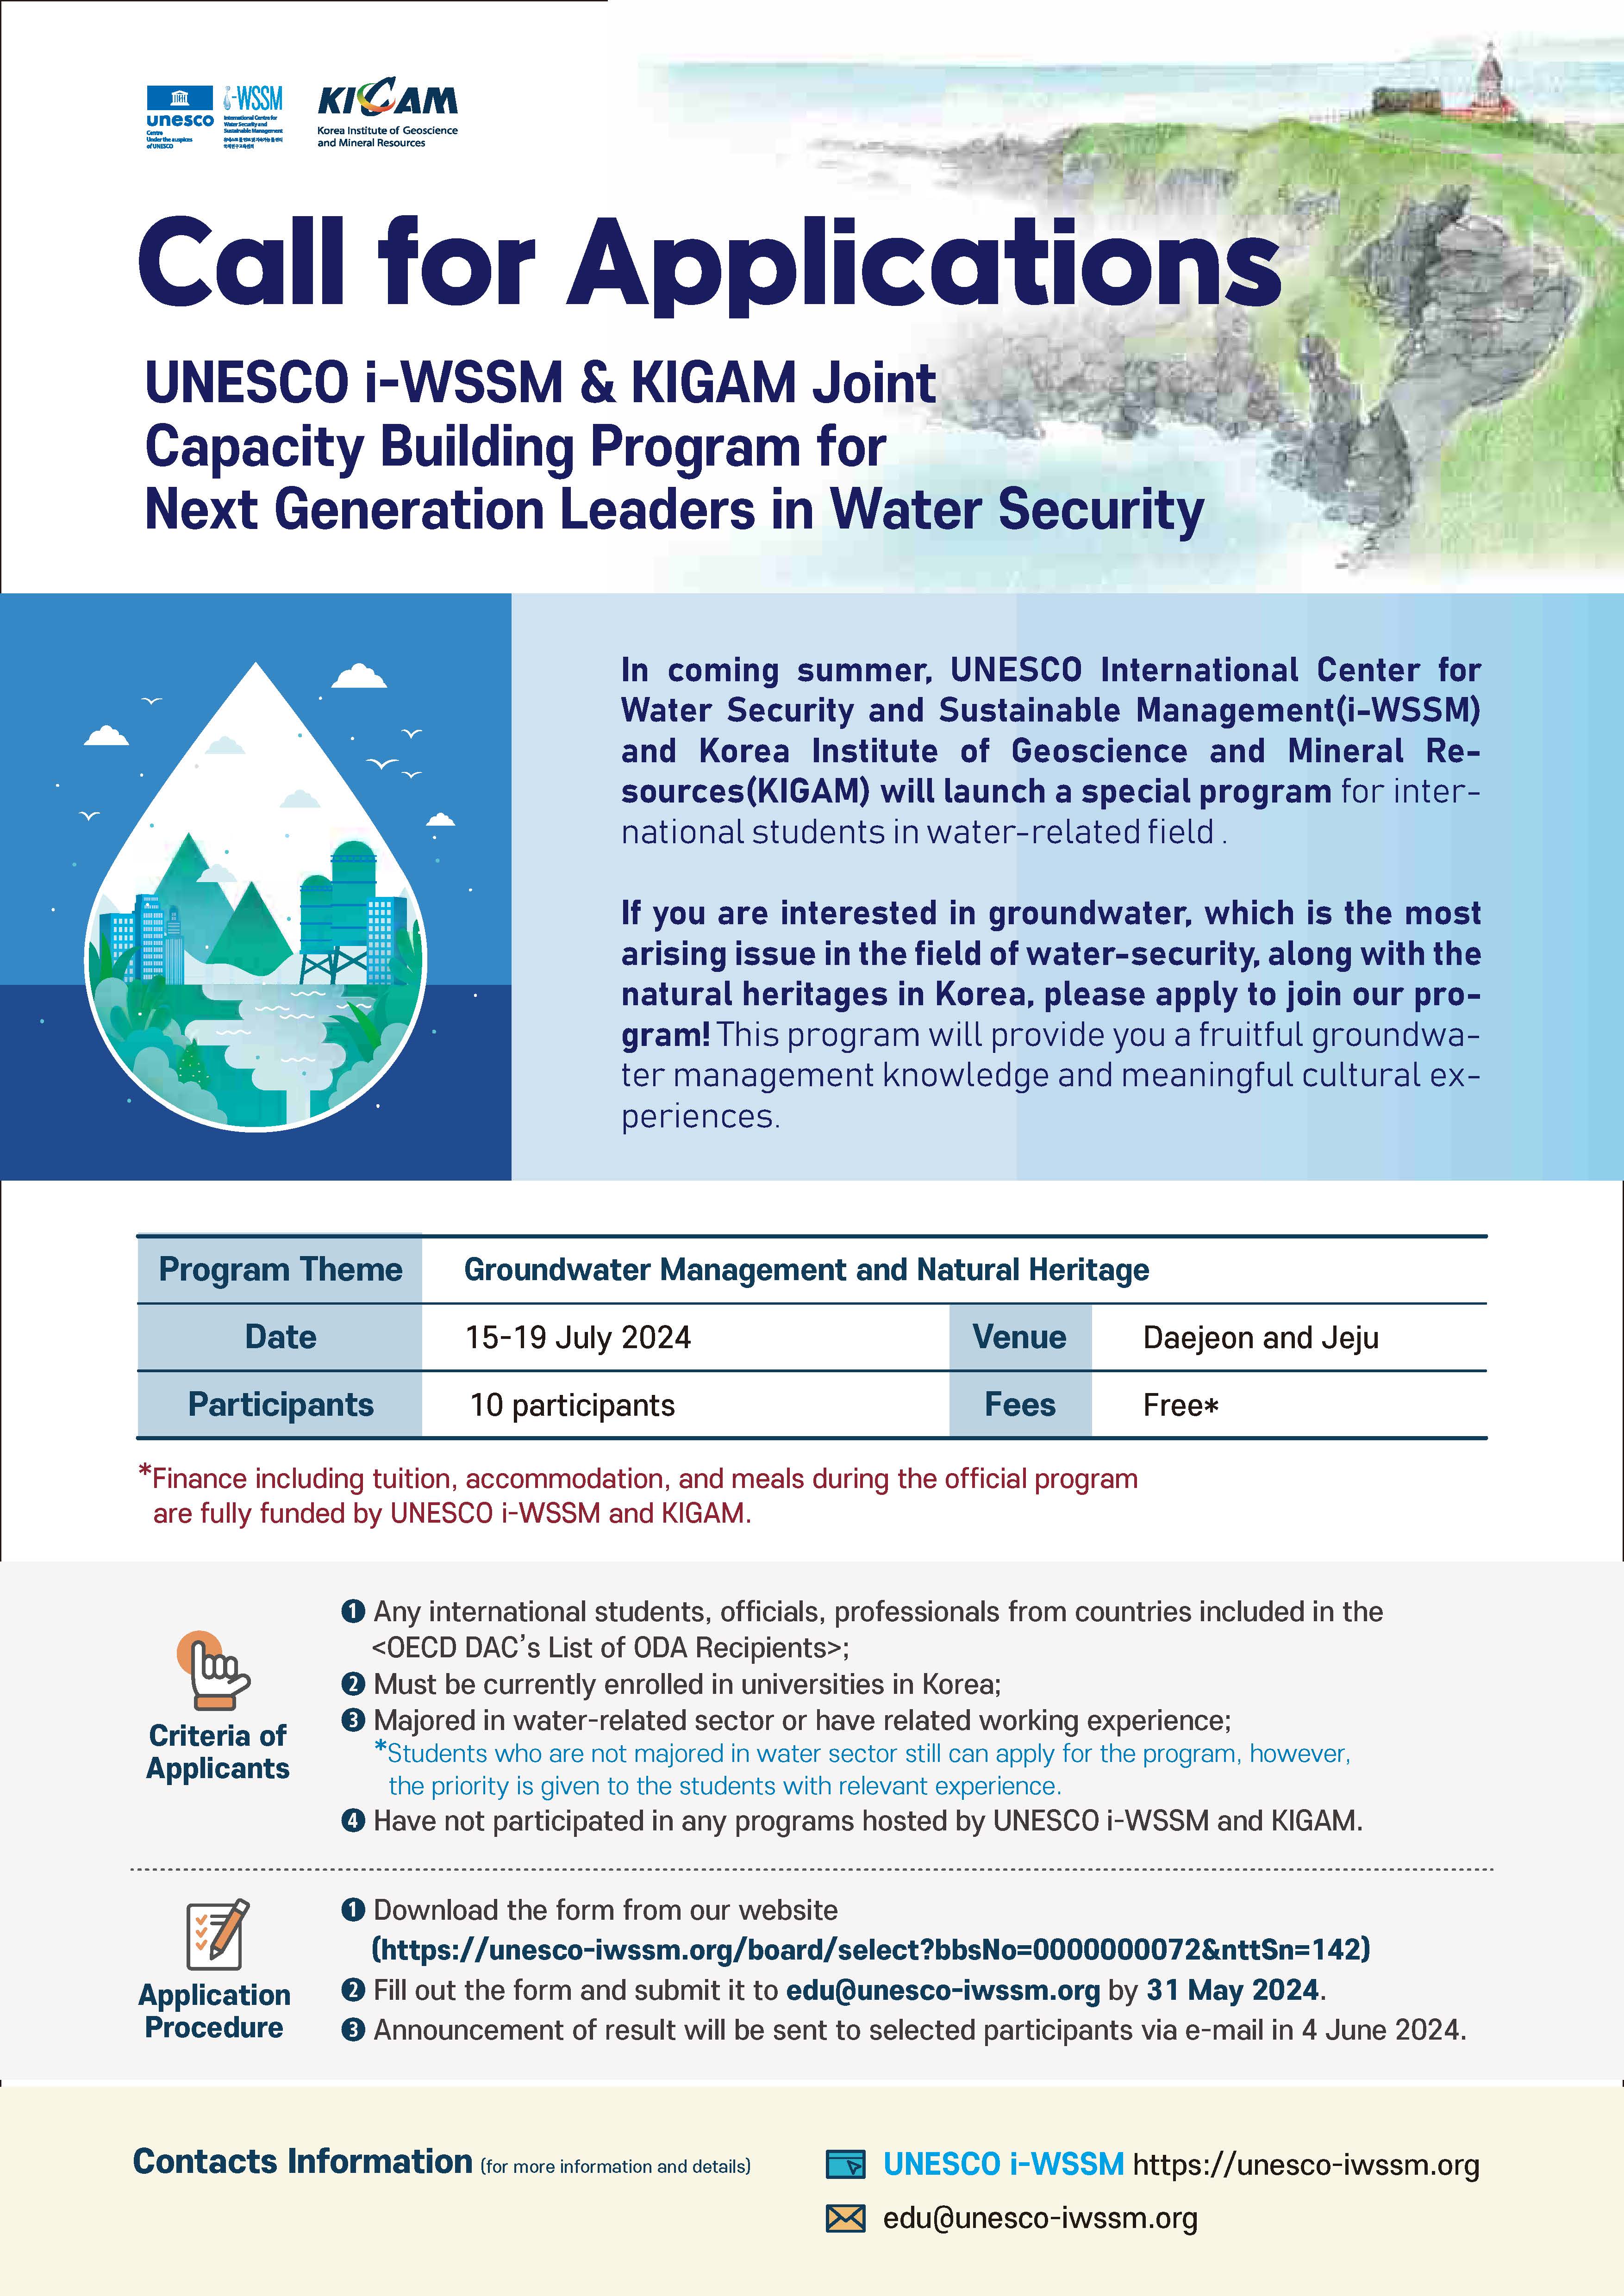 UNESCO i-WSSM and KIGAM Joint Capacity Building Program for Next-Generation Leaders in Water Security 이미지